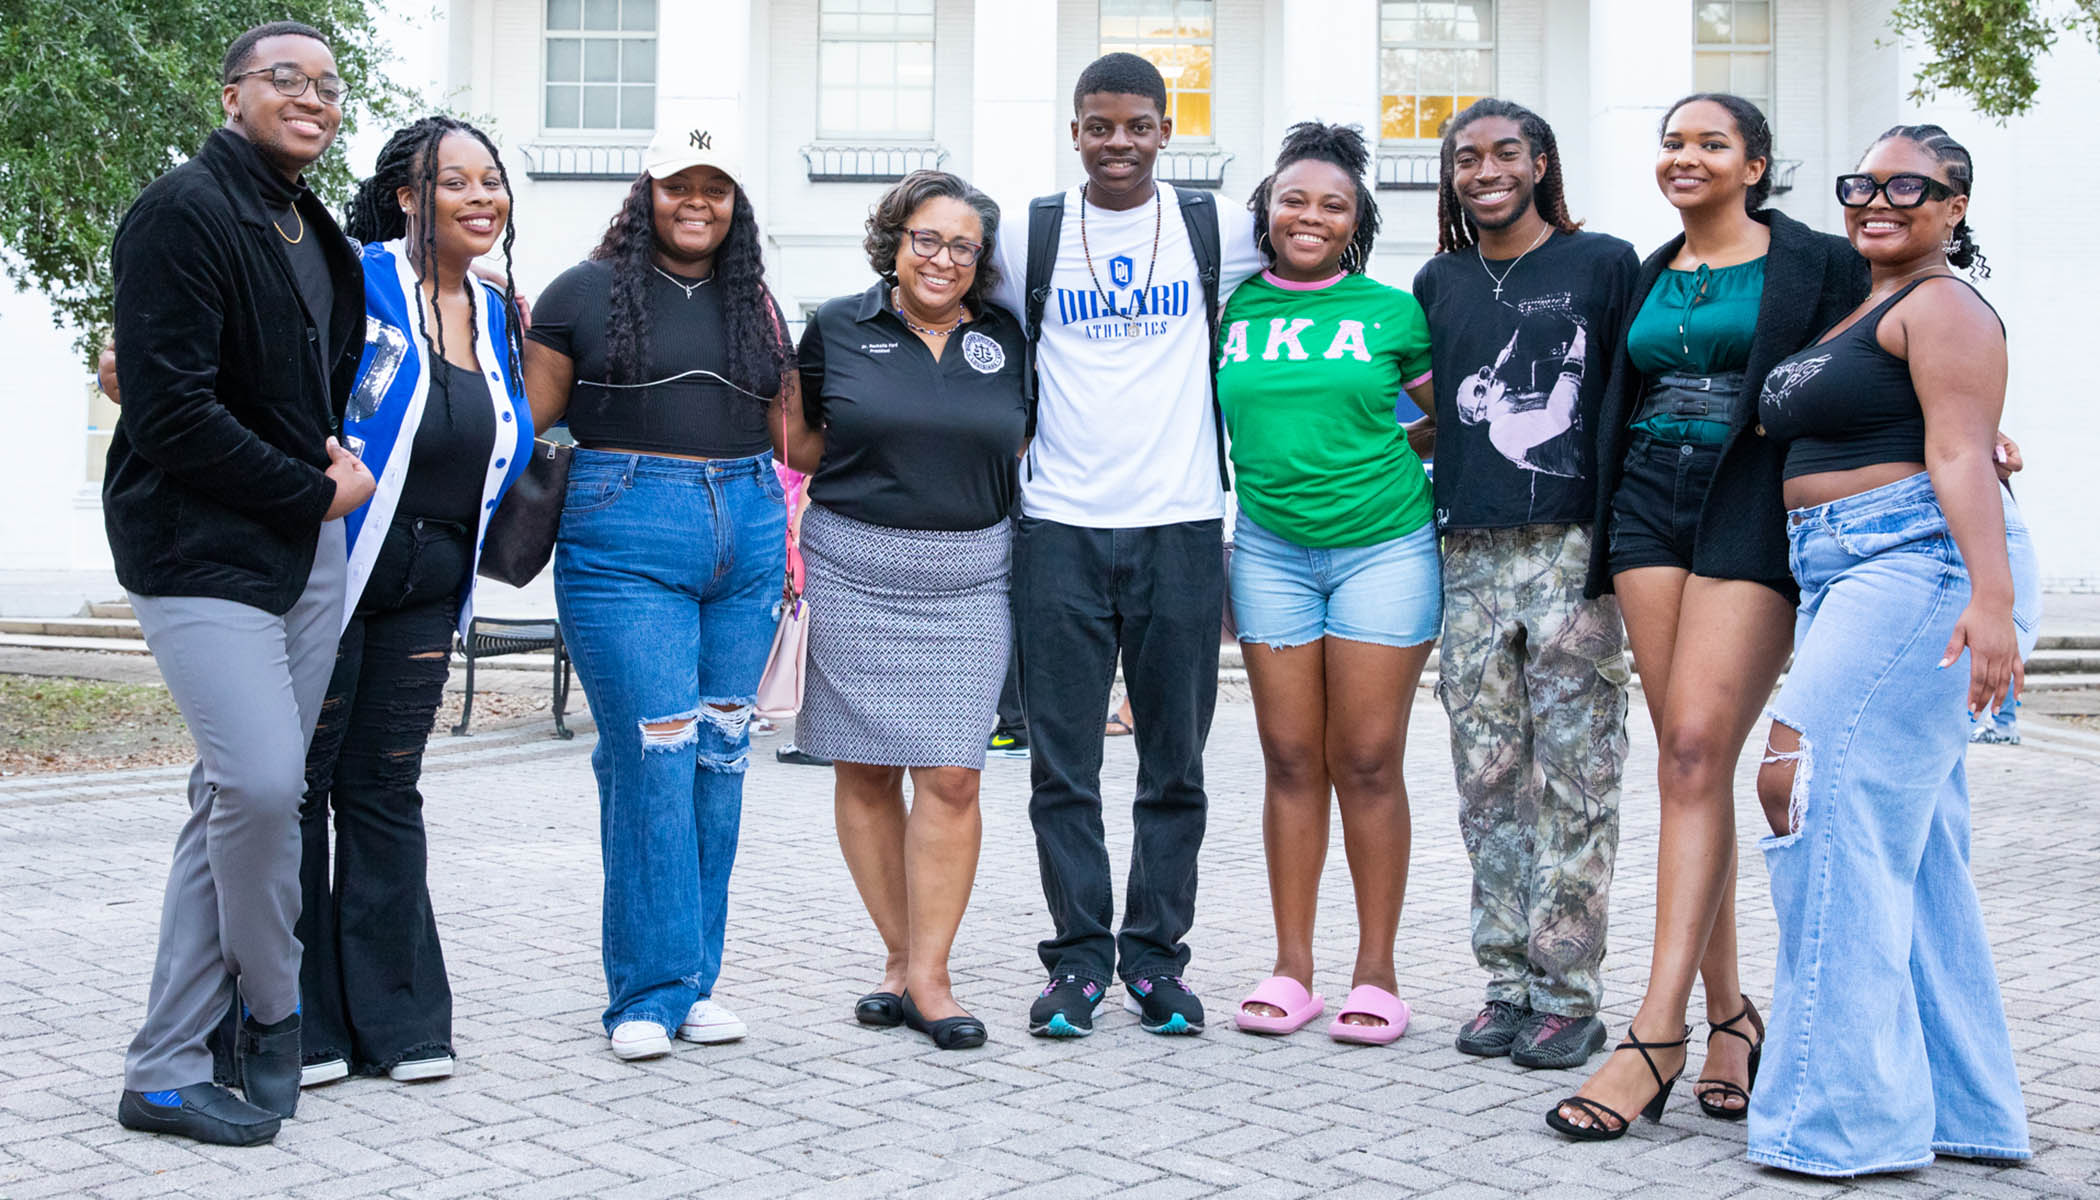  A group photo with Rochelle Ford and Dillard University students. 